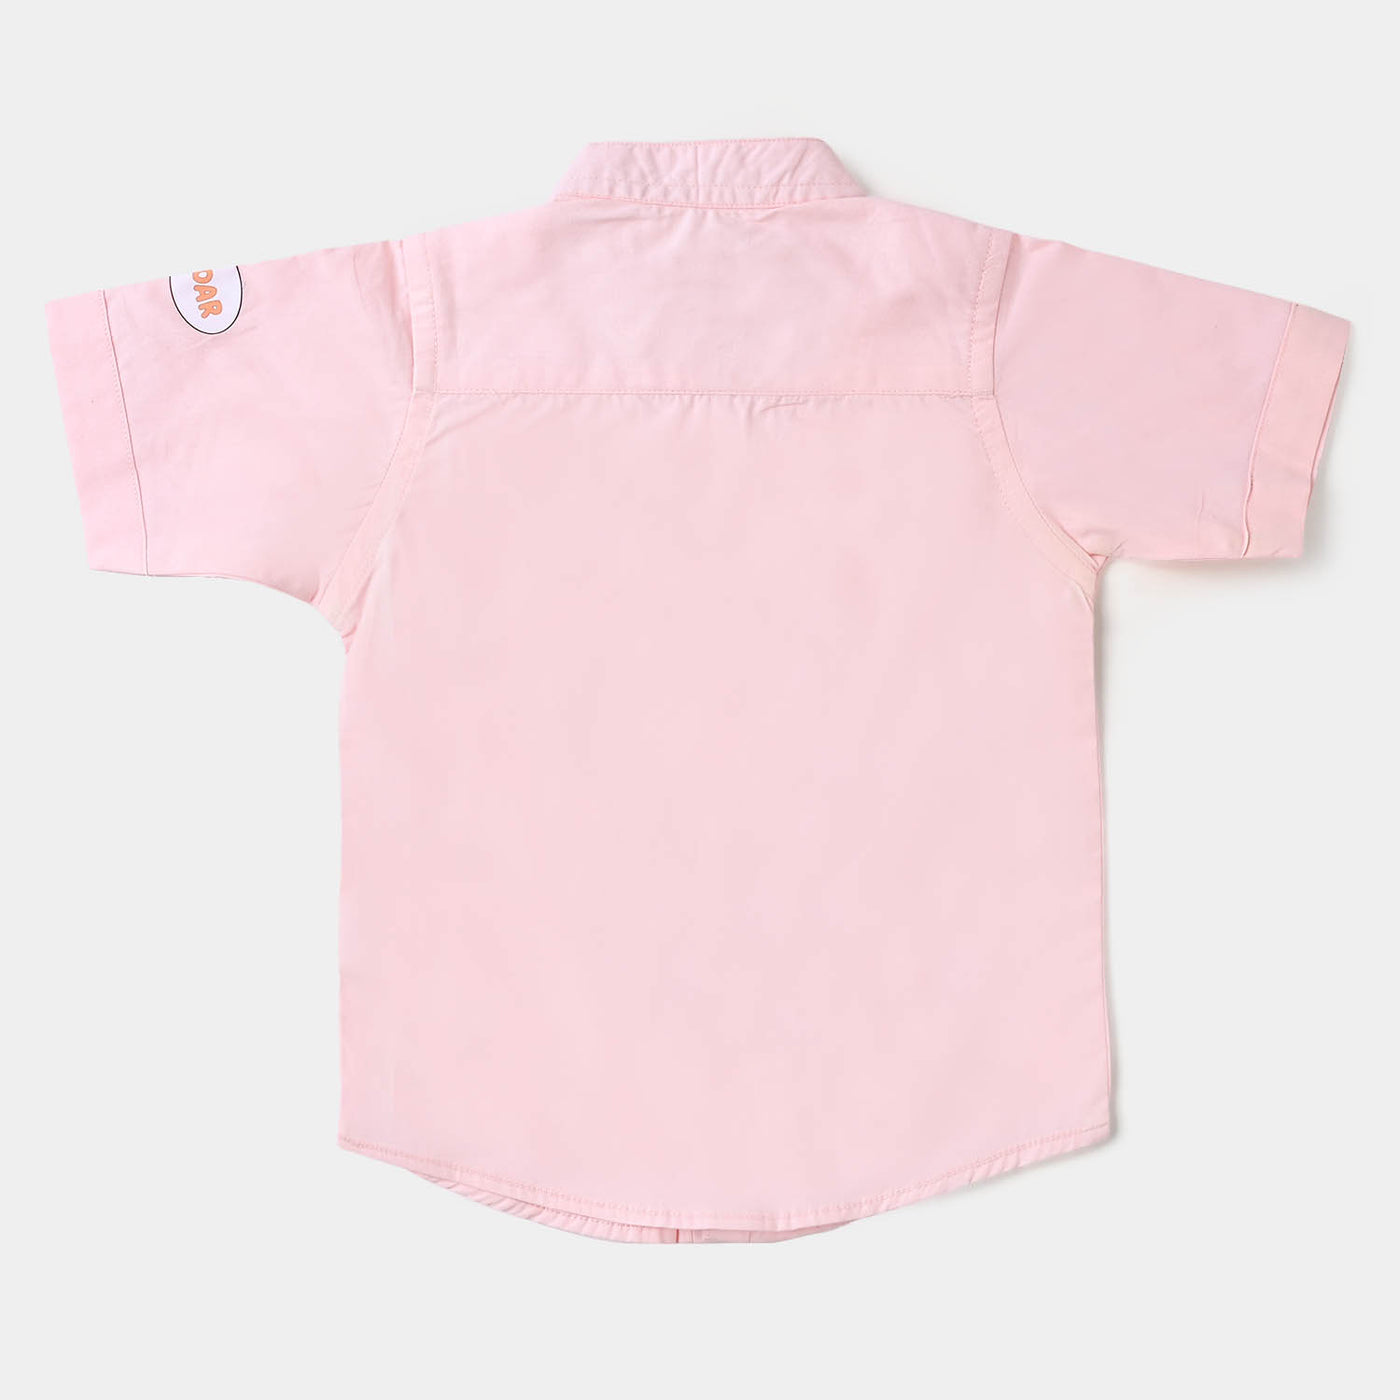 Infant Boys Cotton Casual Shirt Little Tiger - Peachy Pink